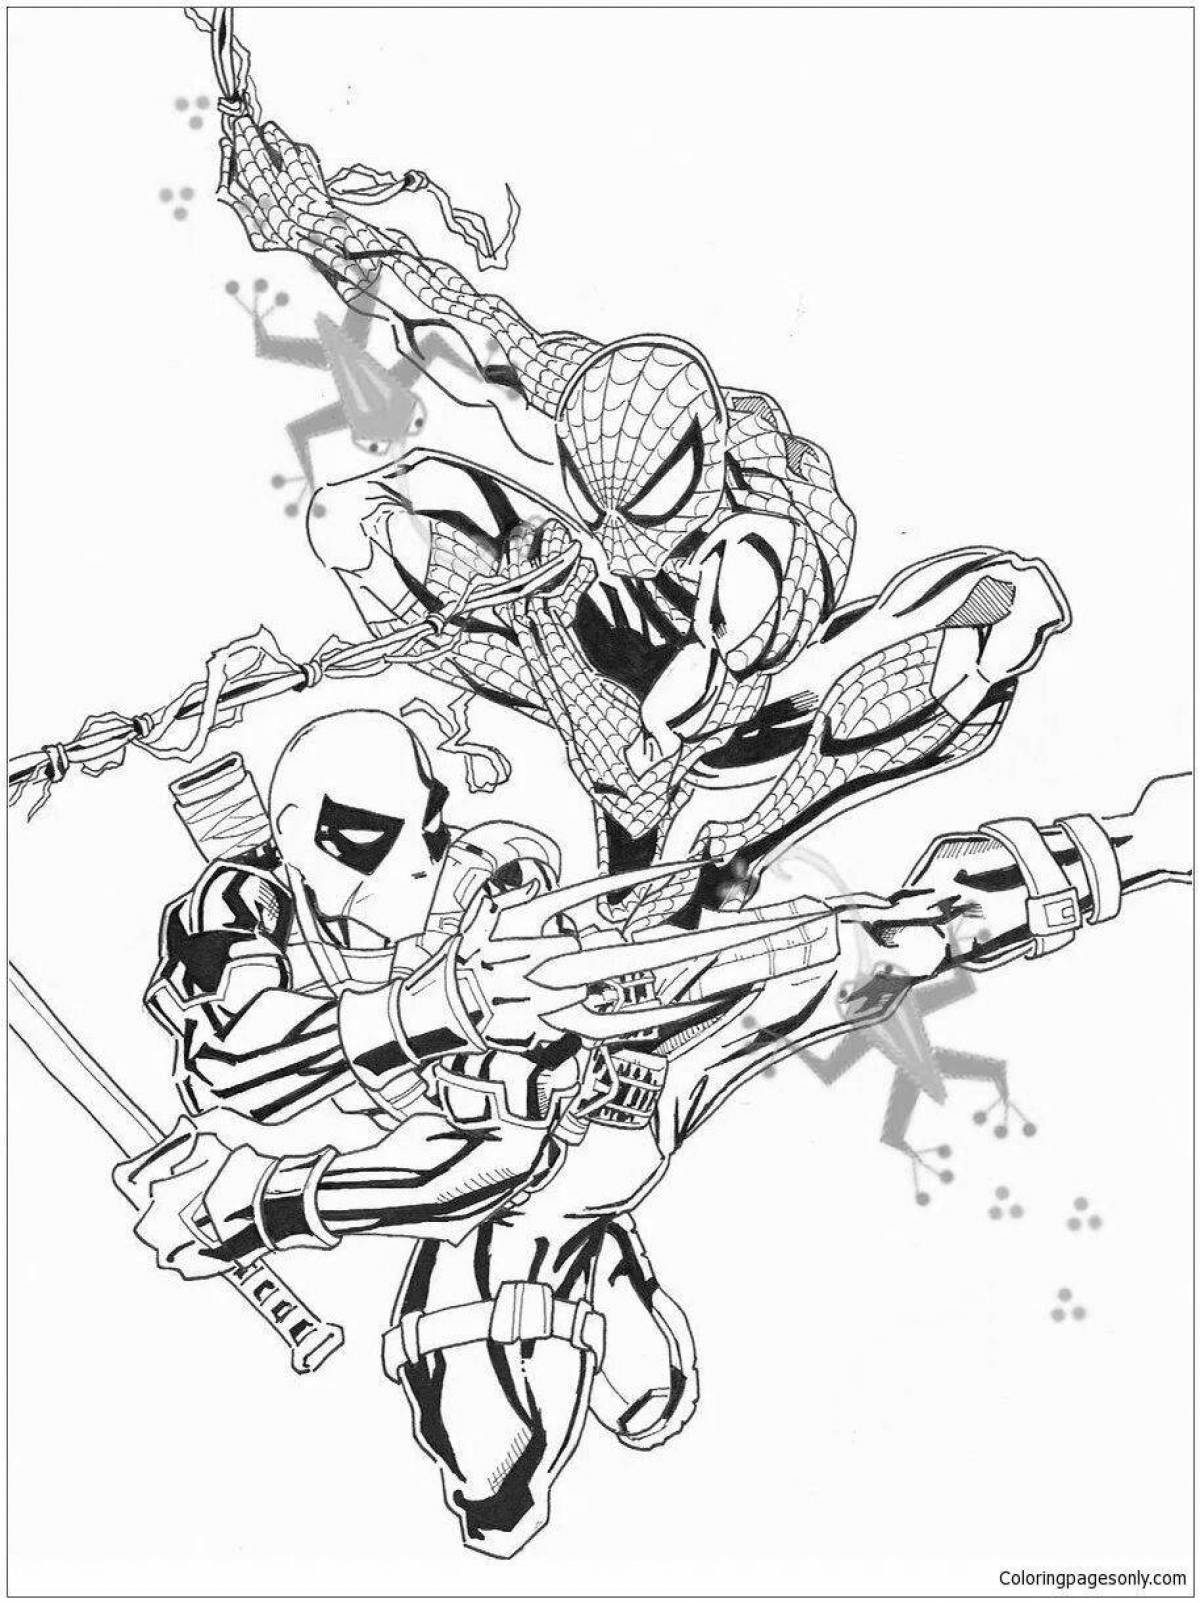 Living deadpool and spiderman coloring pages for kids